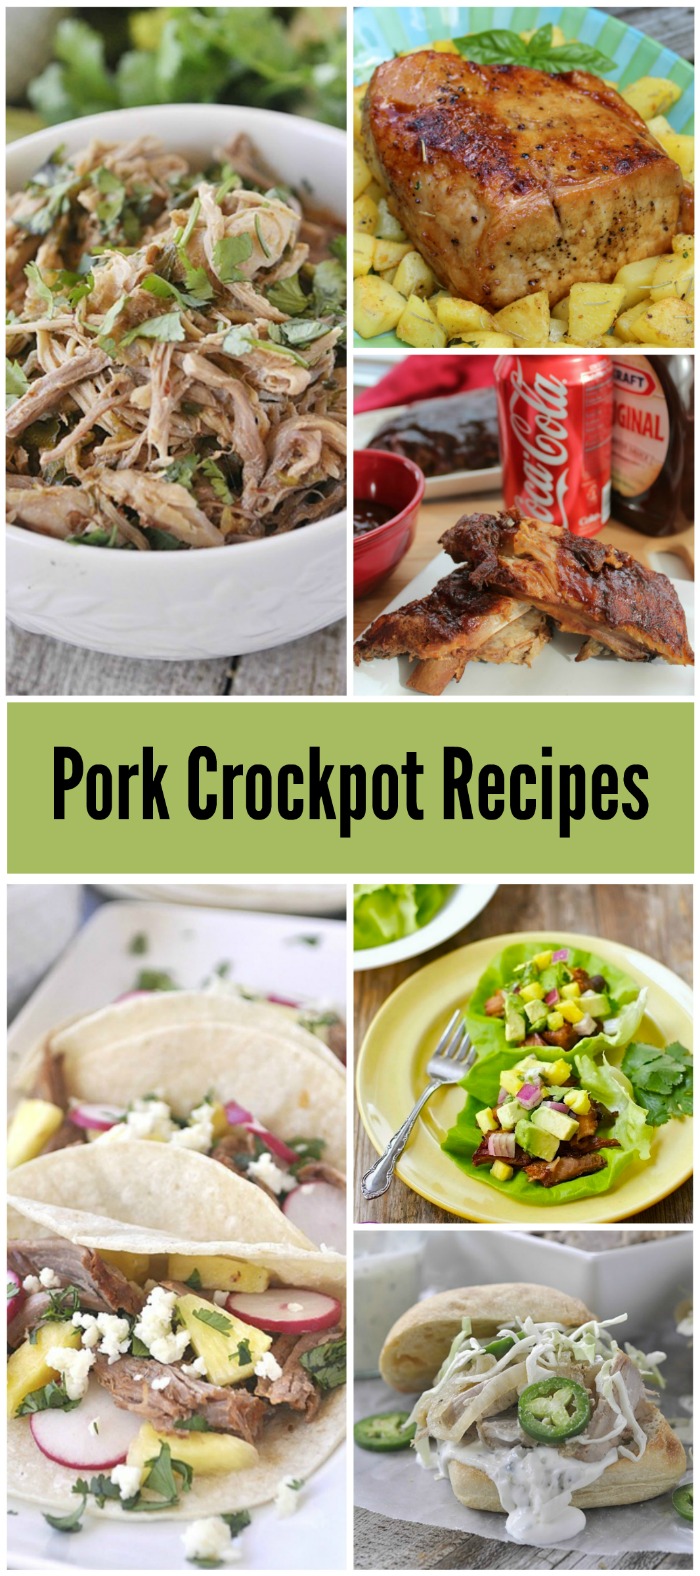 Pork Slow Cooker Recipes - Perfect for your crockpot!